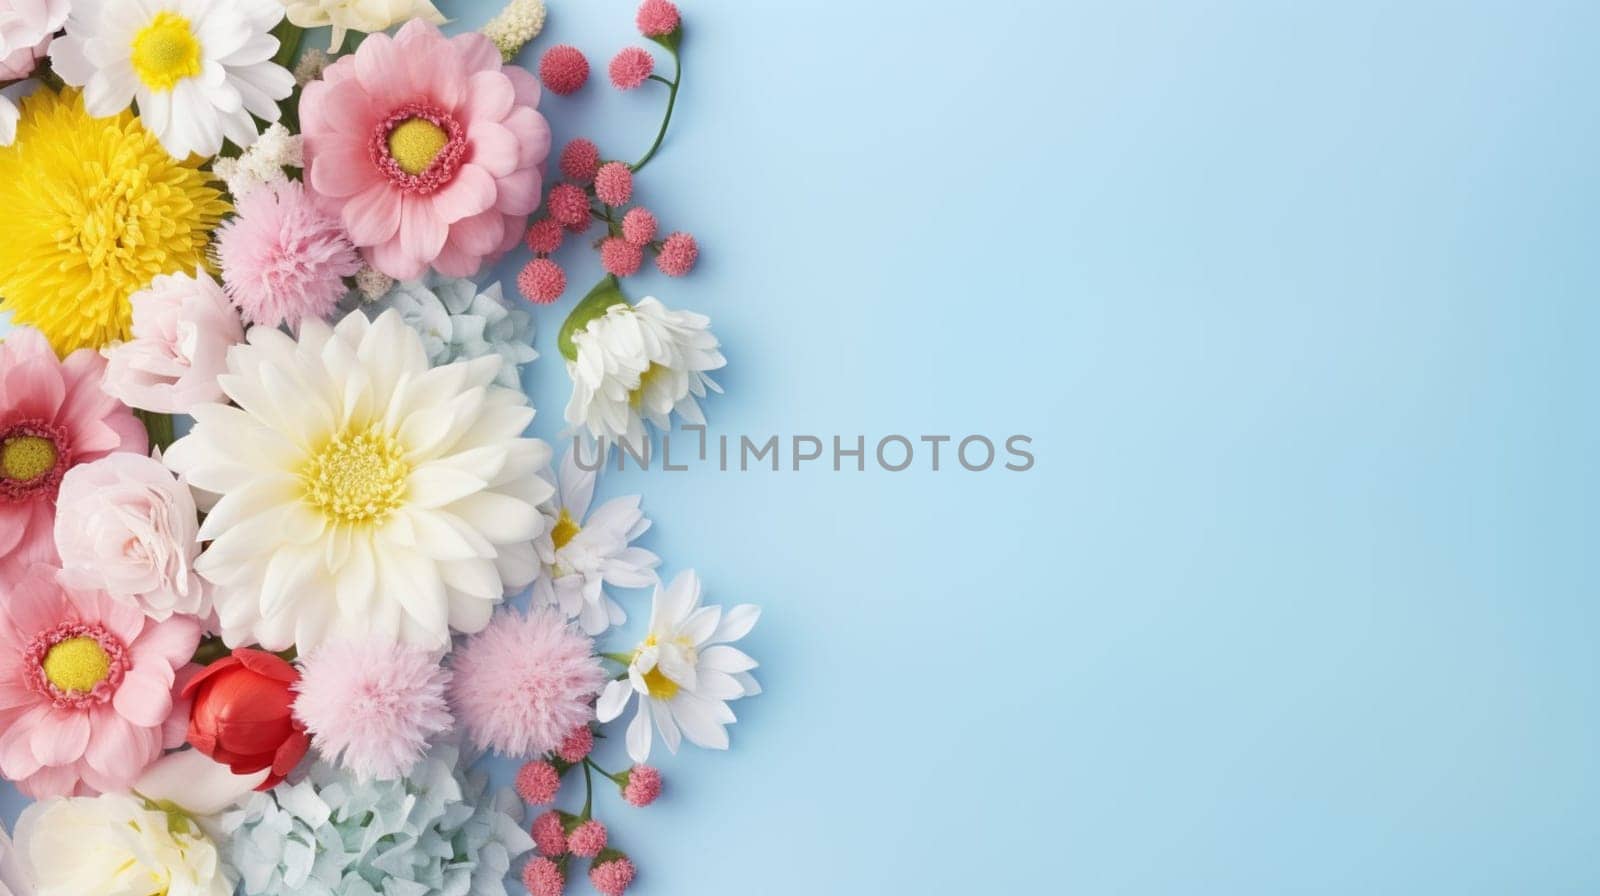 A vibrant assortment of flowers in various shapes and colors set against a soft blue background, with space for text. High quality photo